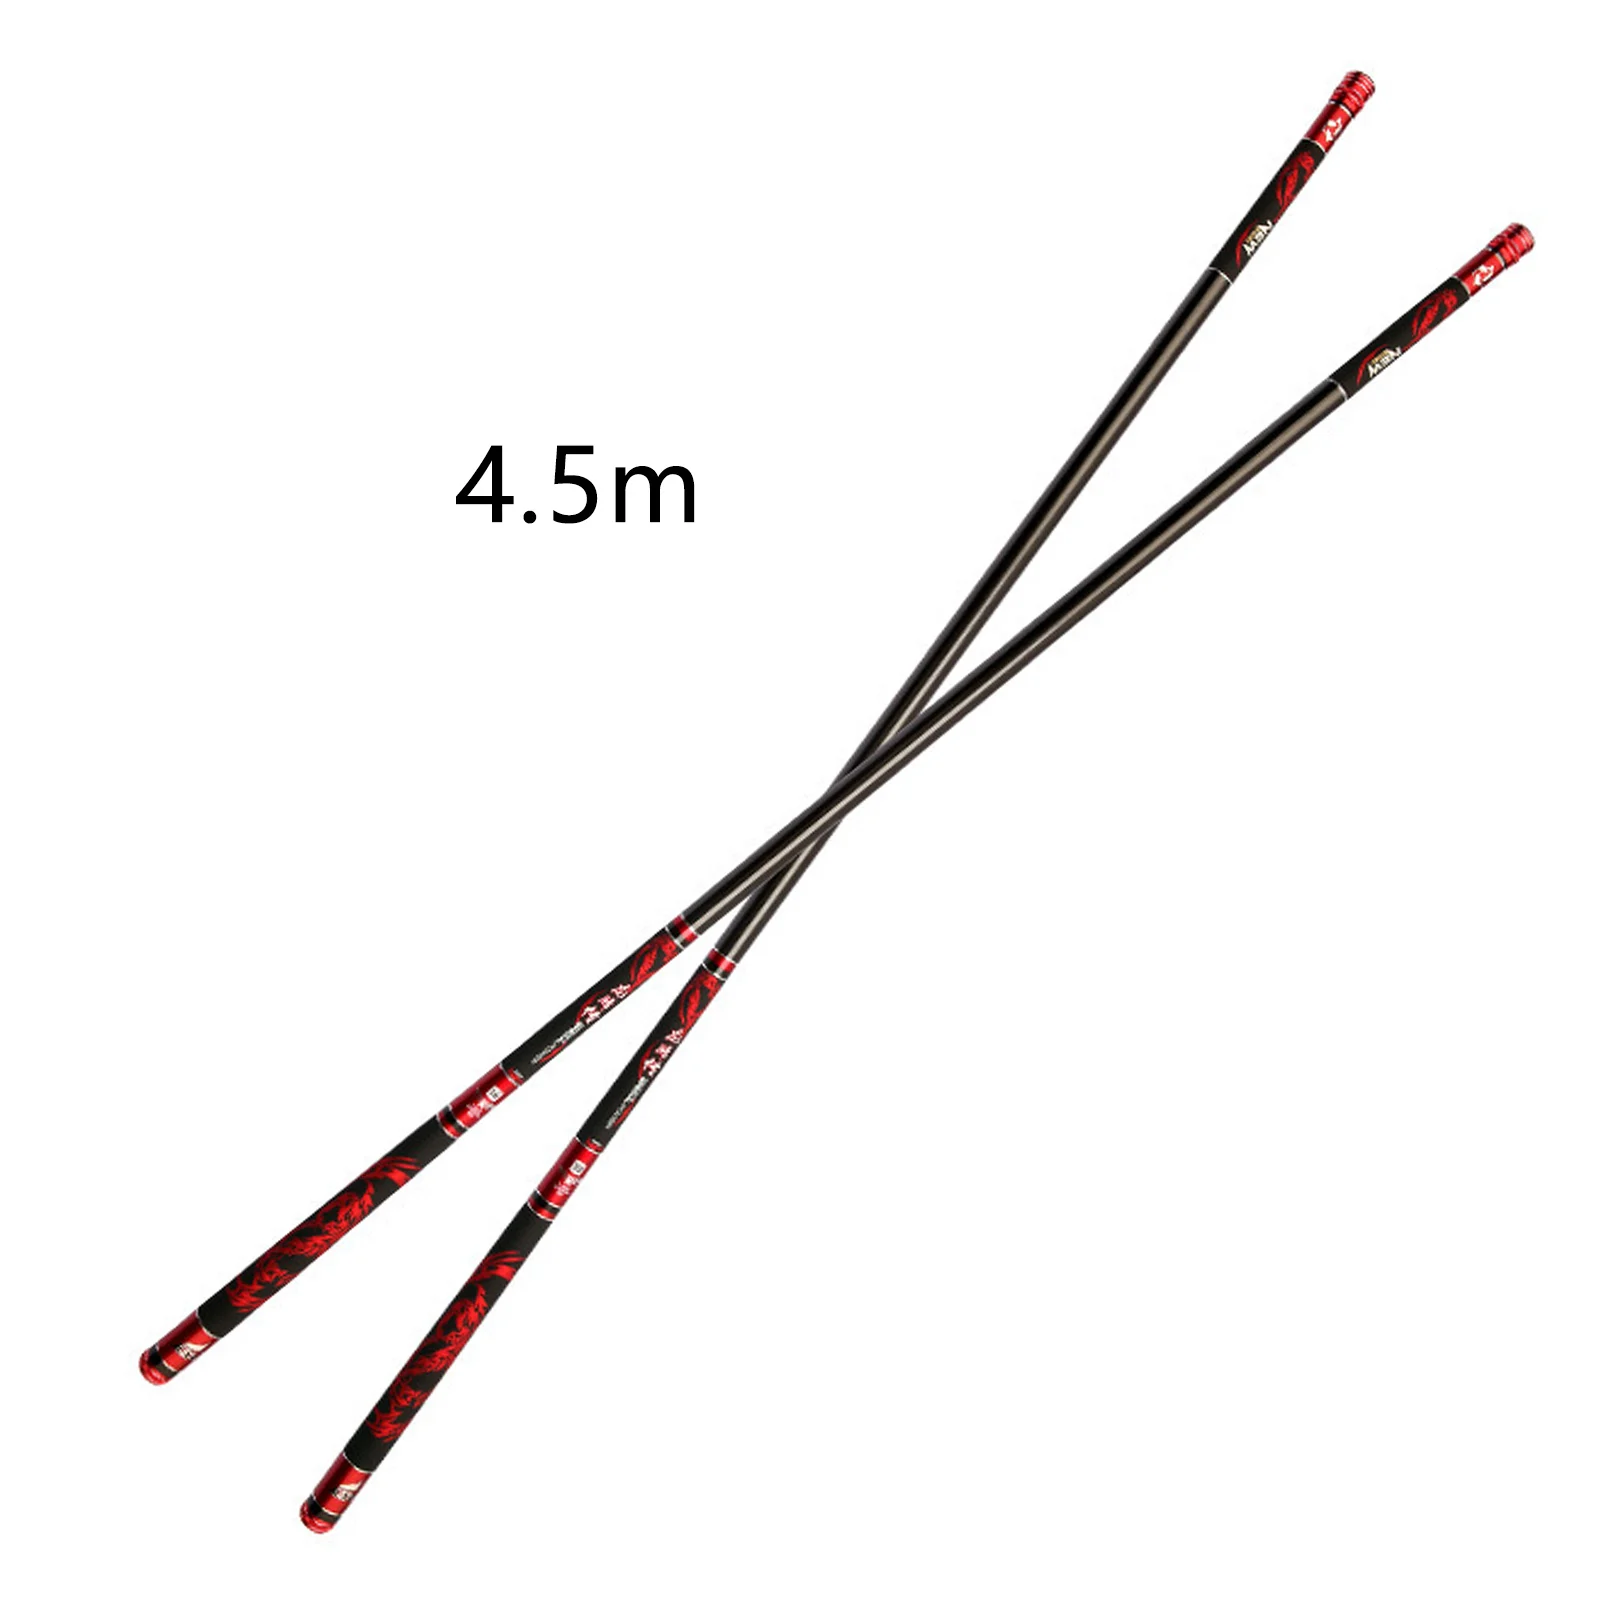 7H Light and Stiff Fishing Rods with Light and Rigid Rod Body for Angler's Holiday Good Gift UT